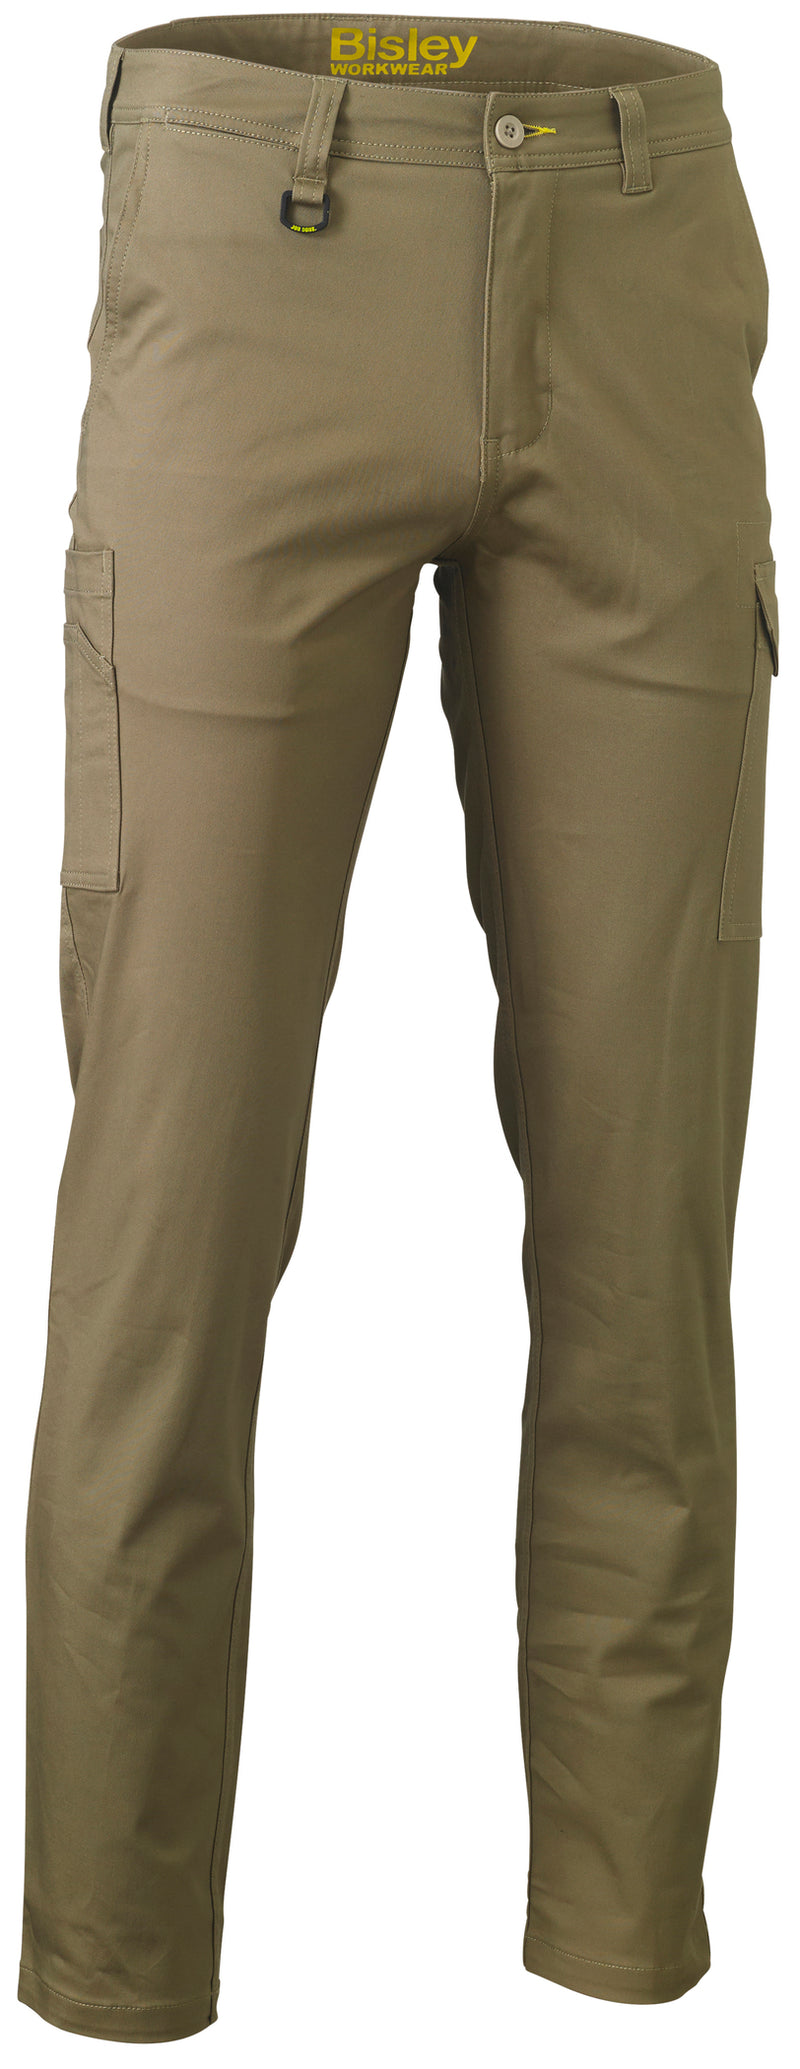 Load image into Gallery viewer, Wholesale BPC6008 Bisley Stretch Cotton Drill Cargo Pants - Stout Printed or Blank
